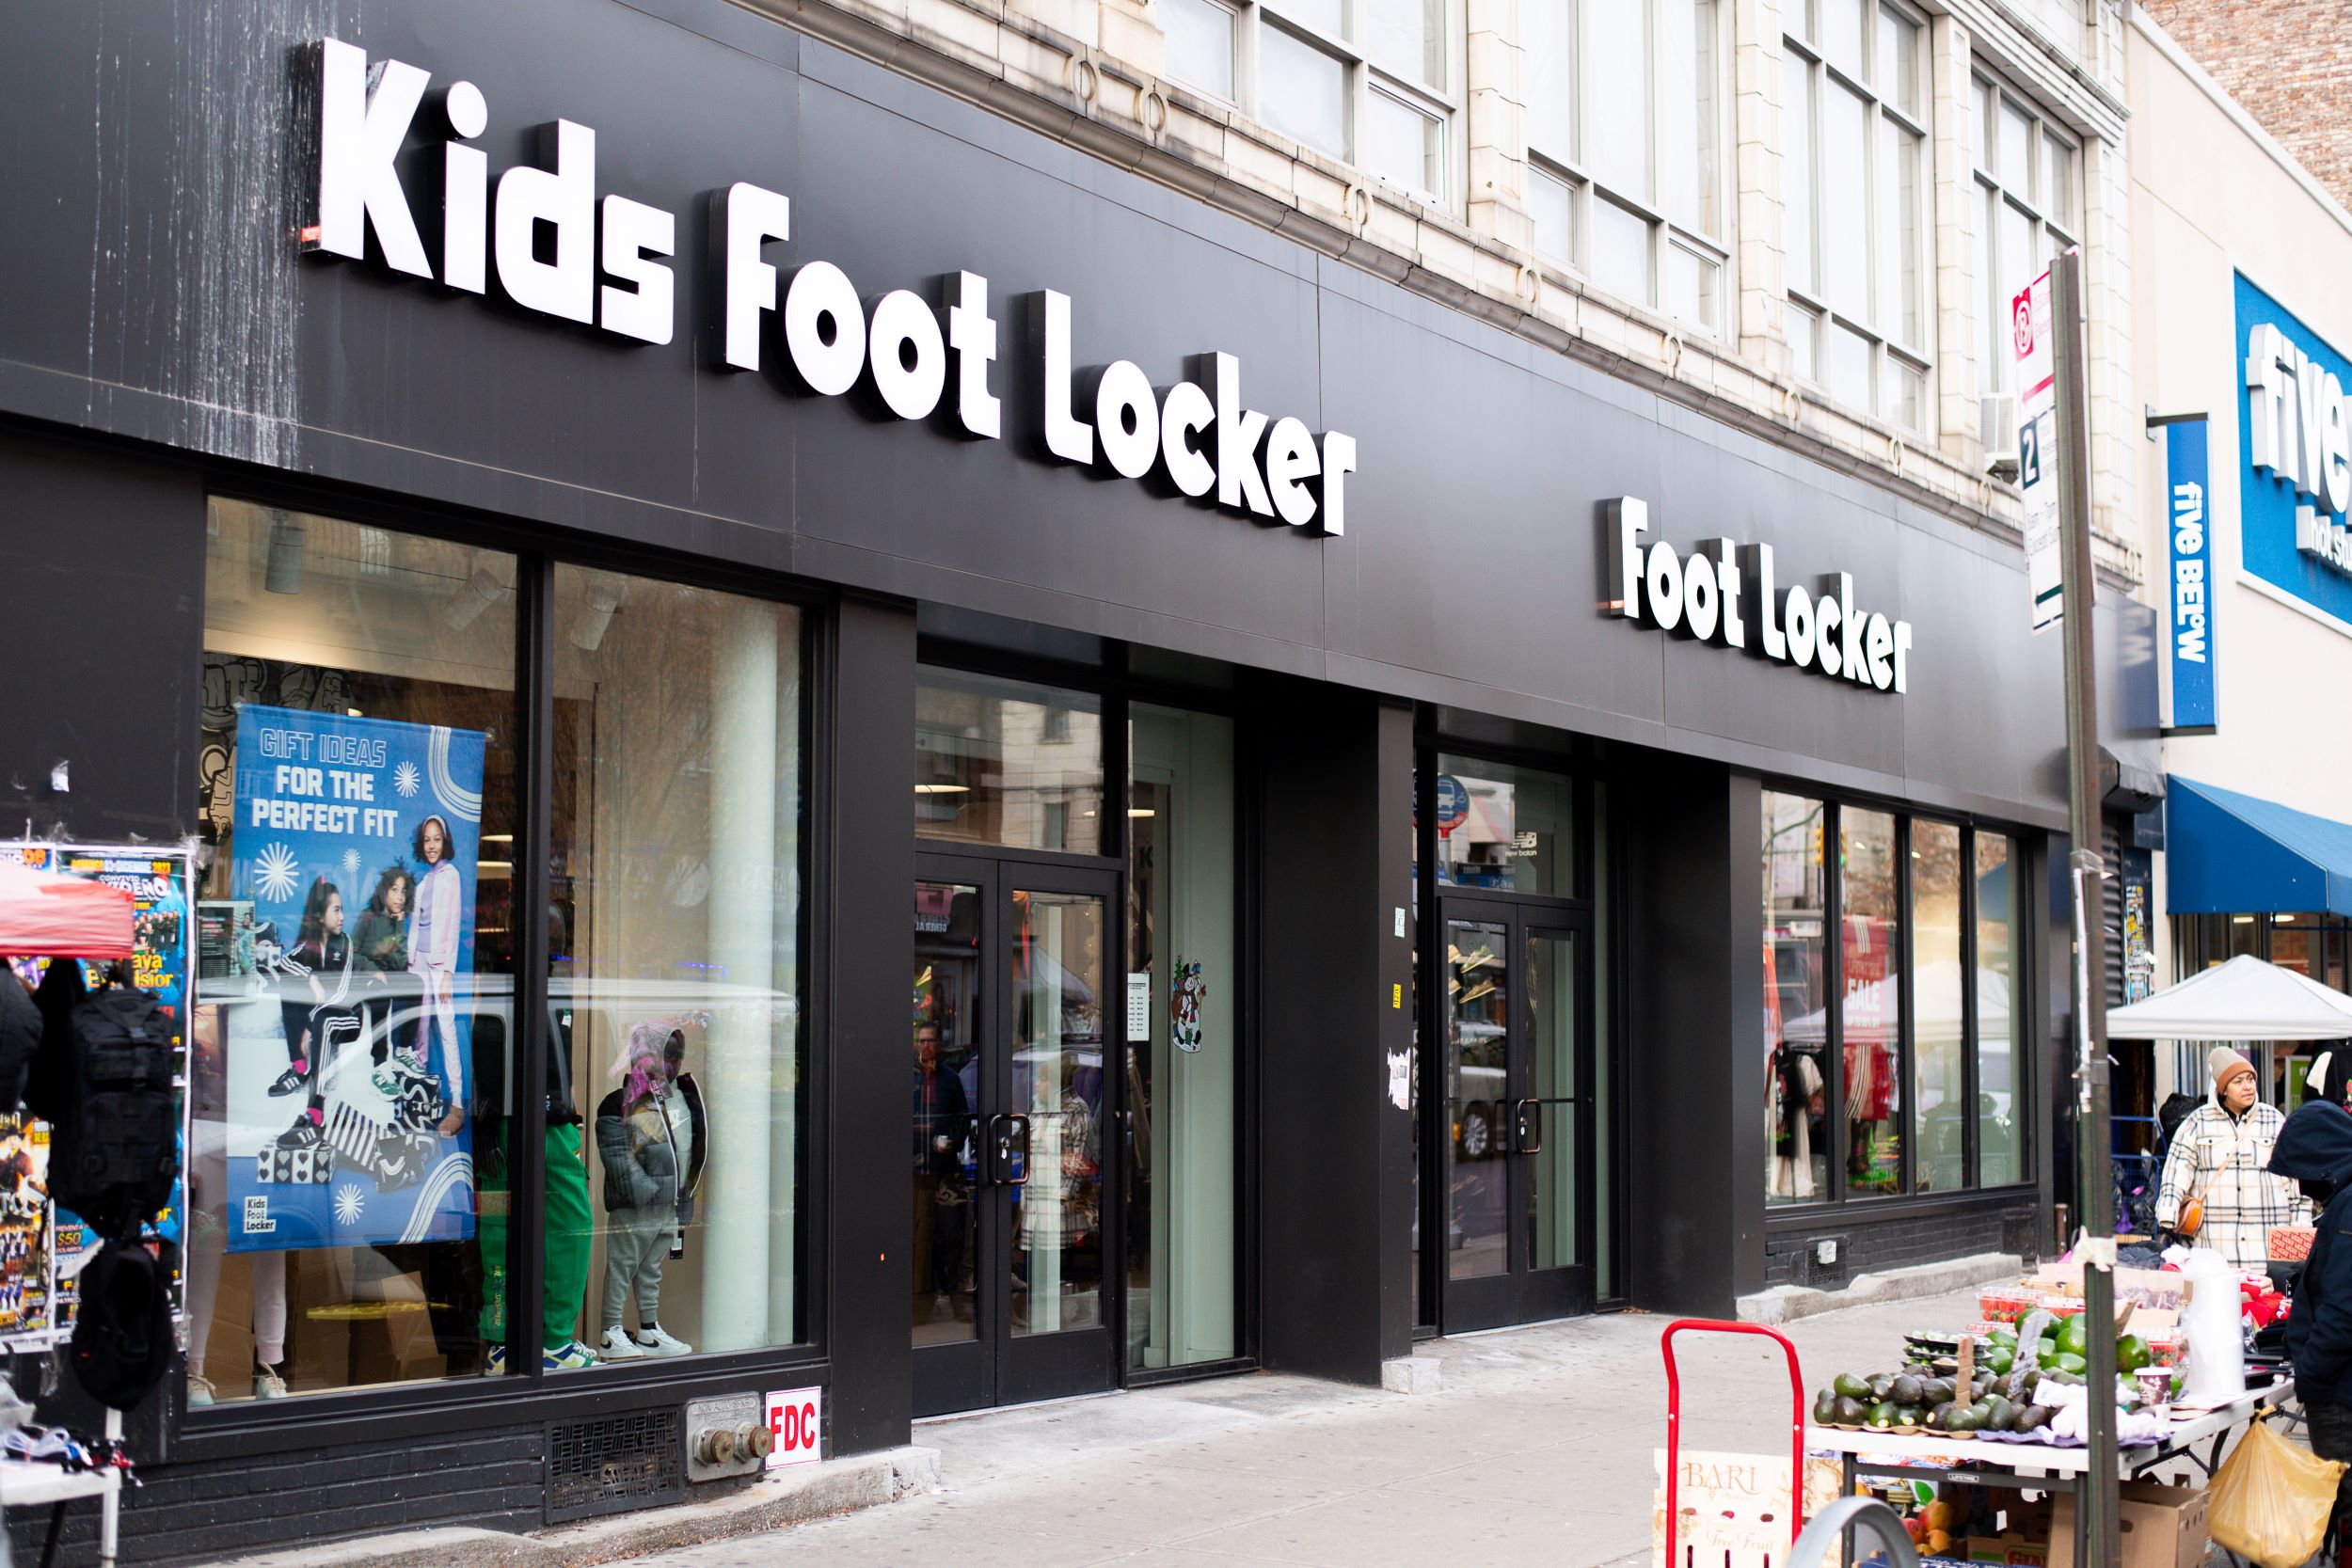 Exterior of a kids foot locker store with displayed sneakers and apparel visible through large glass windows, situated on a busy urban street.